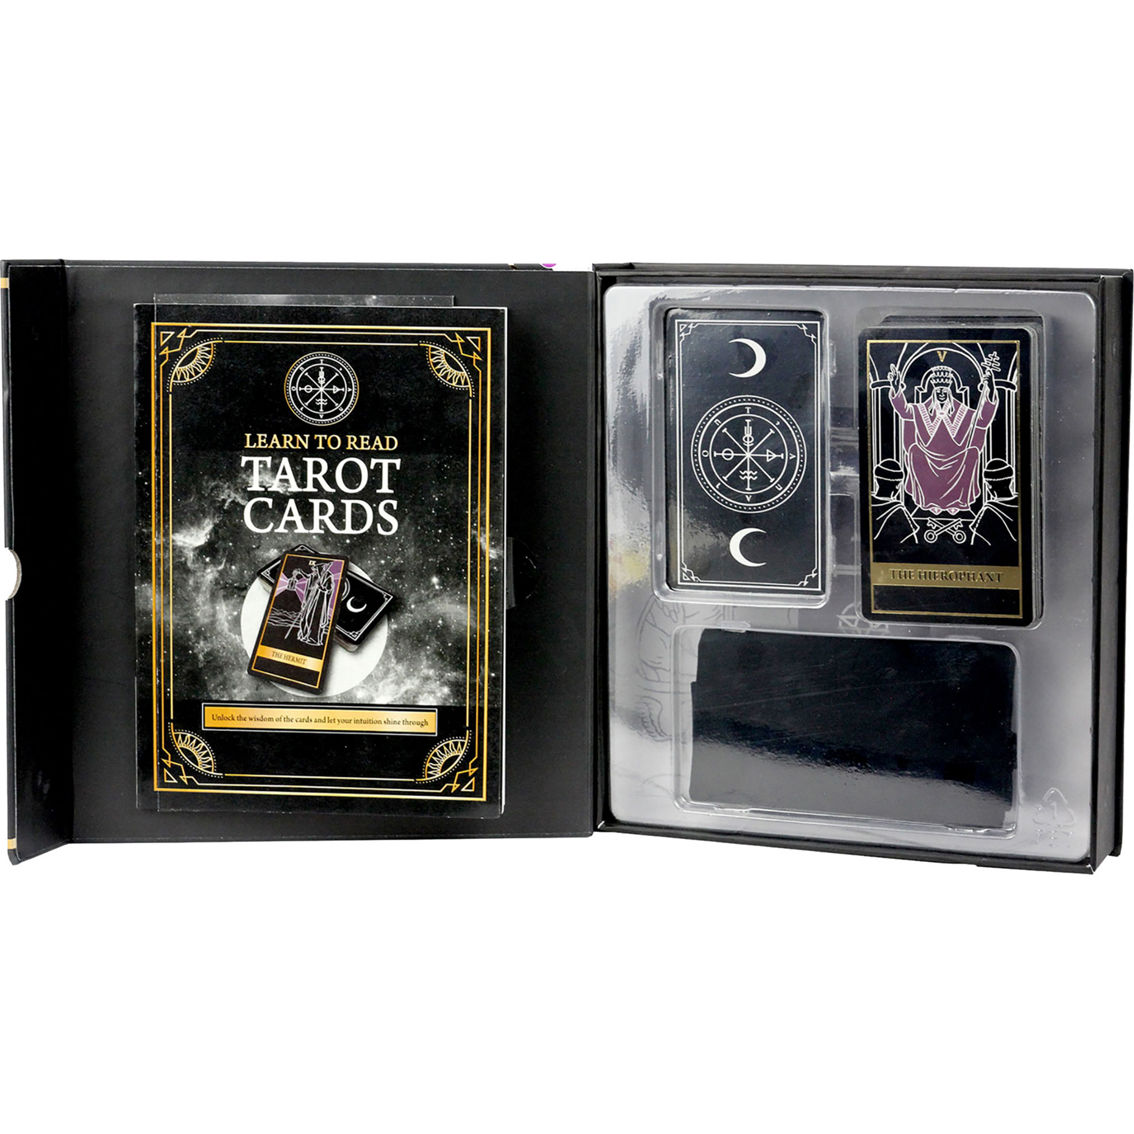 SpiceBox Gift Box: Tarot Cards - Image 3 of 7